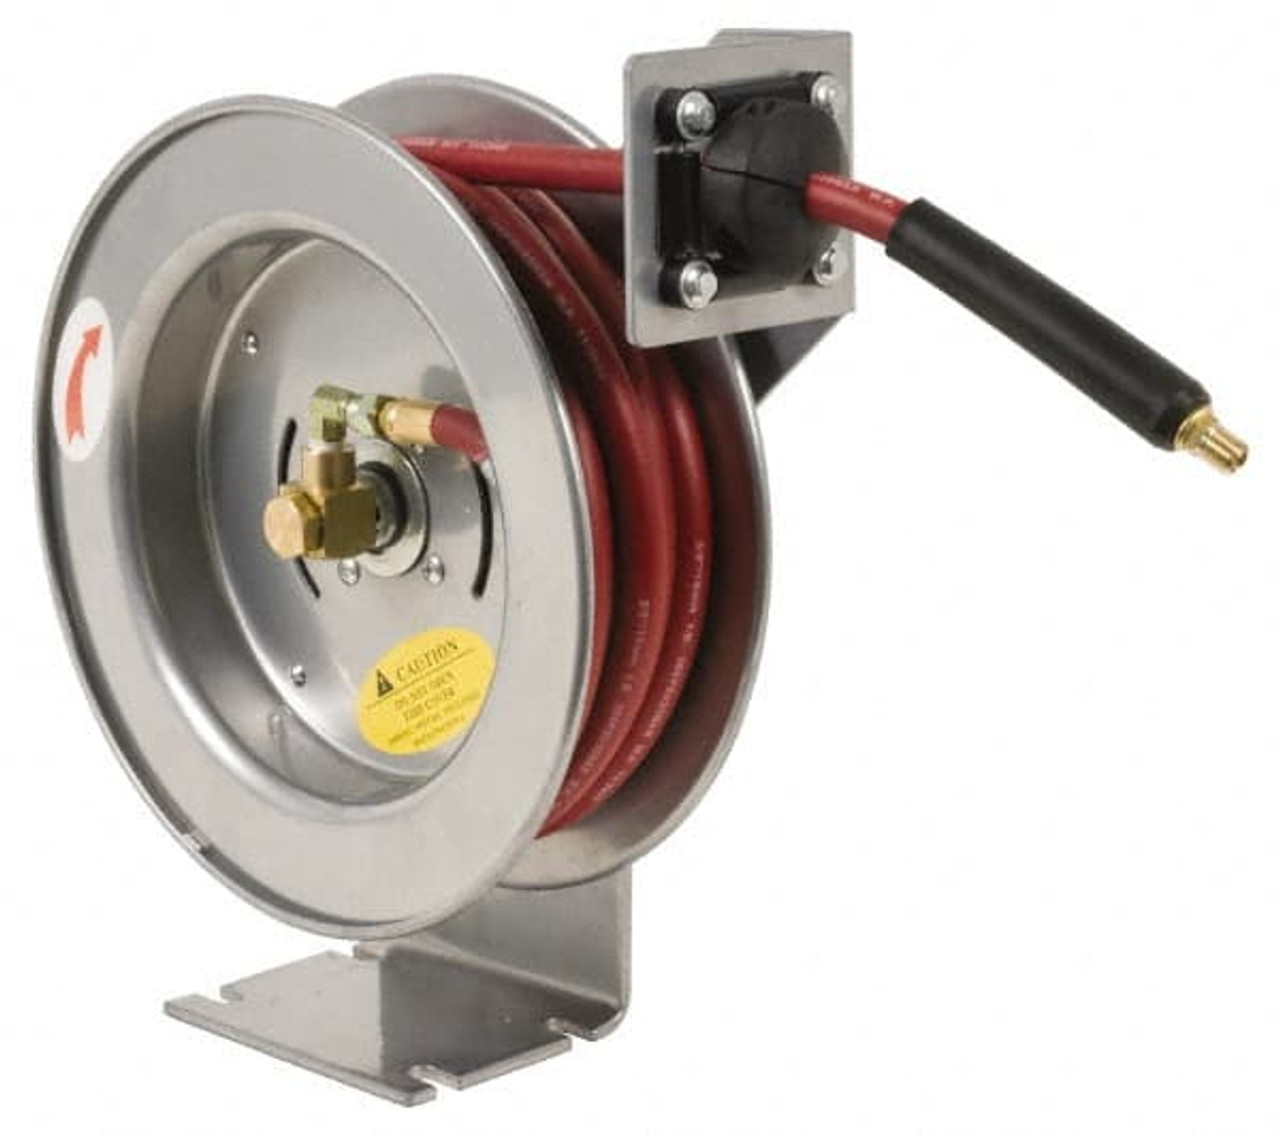 PRO-SOURCE 75 ft. Spring Retractable Hose Reel 300 psi, Hose Included  2810037510PRO - 60193034 - Penn Tool Co., Inc